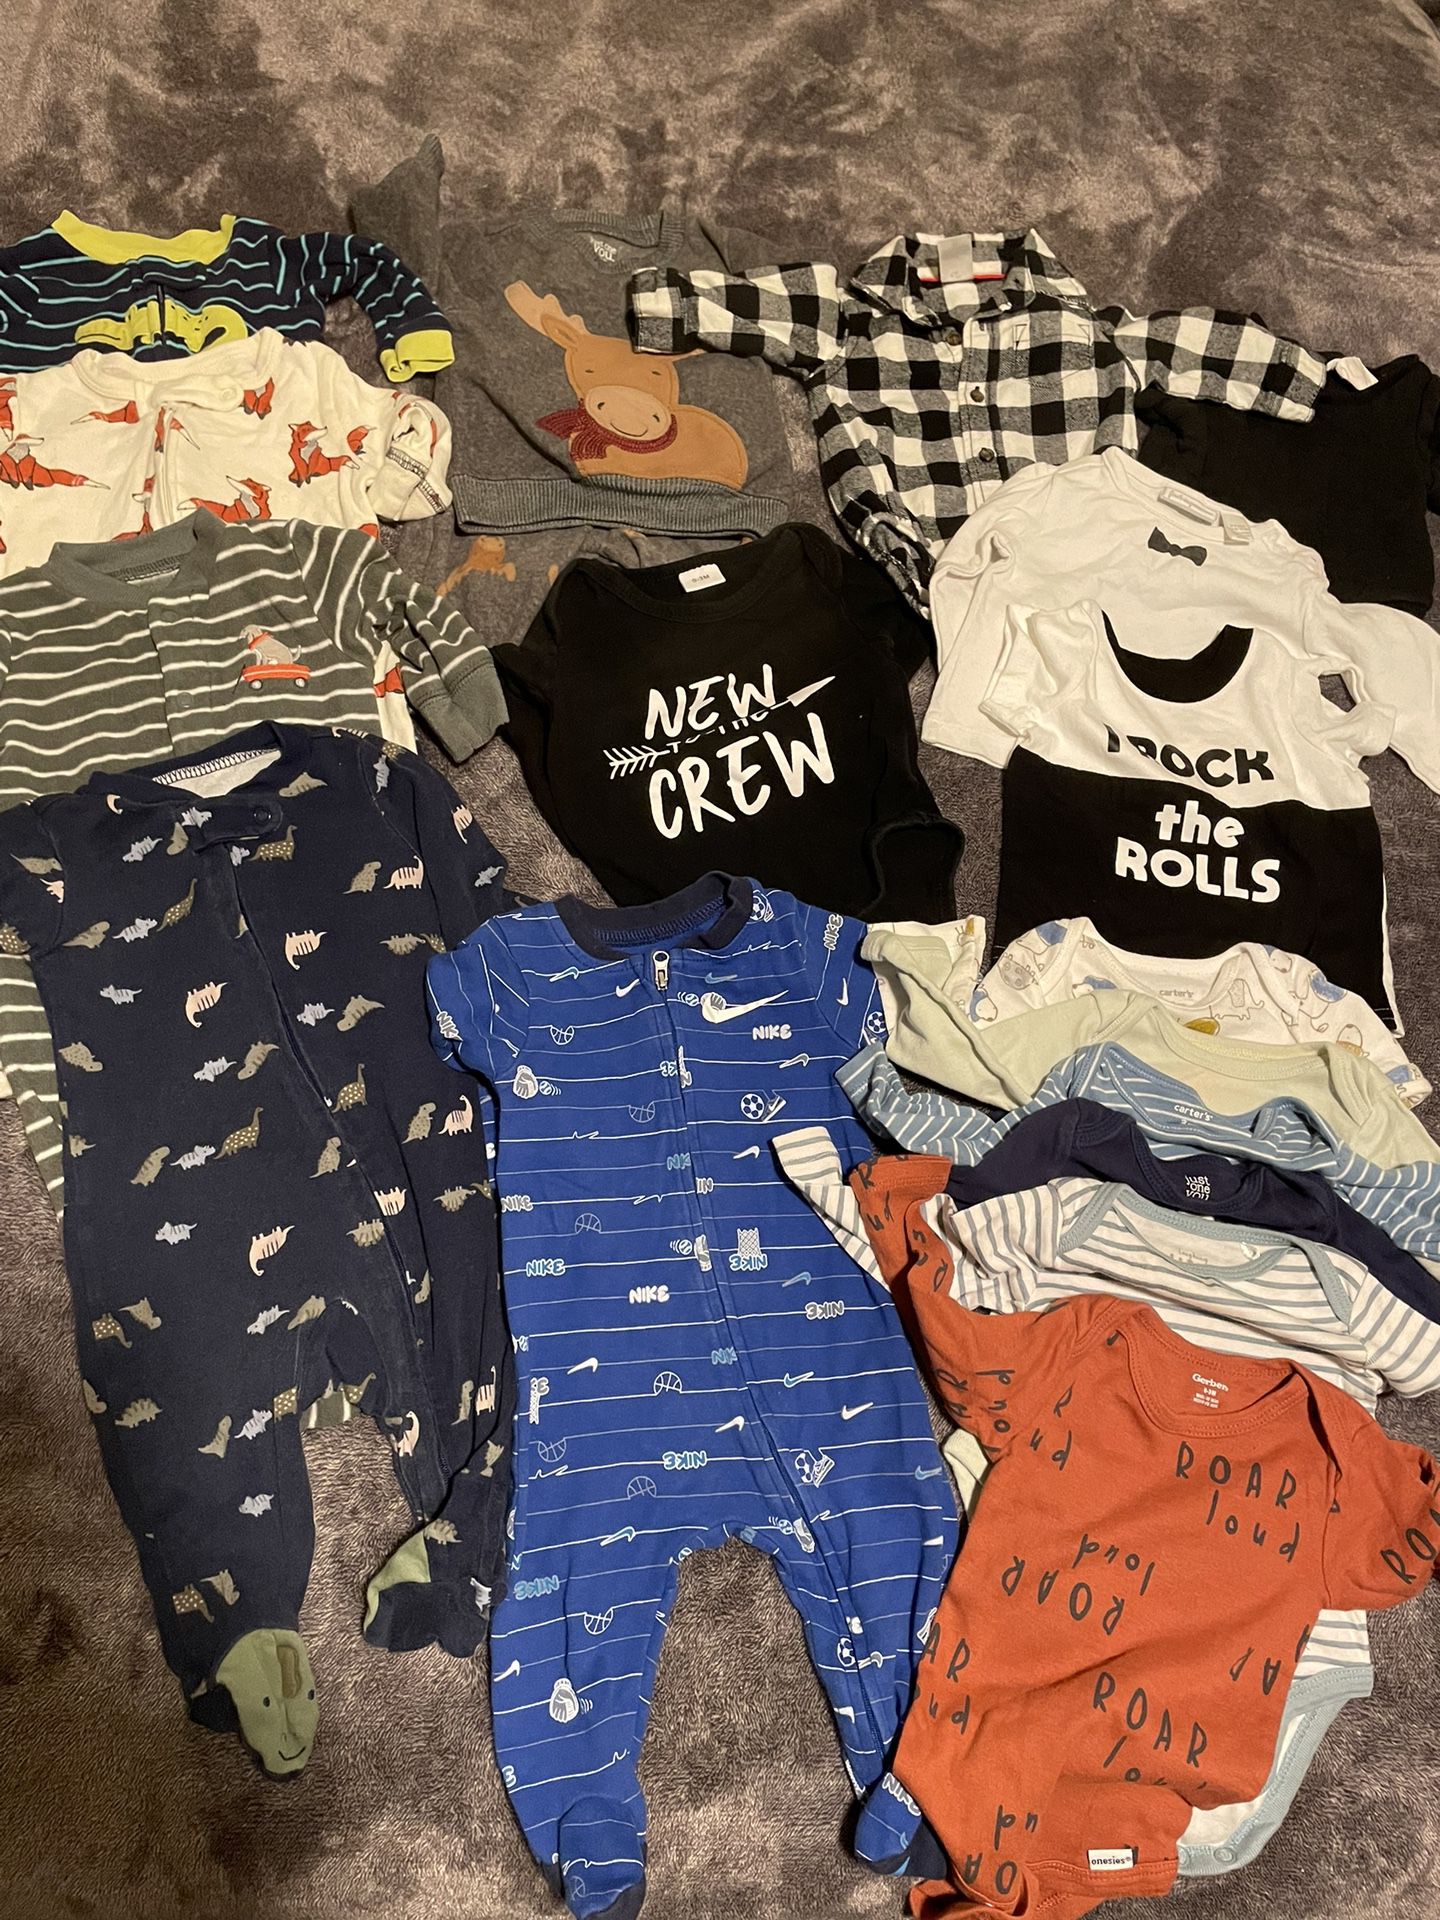 0-3 Baby Boys Clothes  Lot